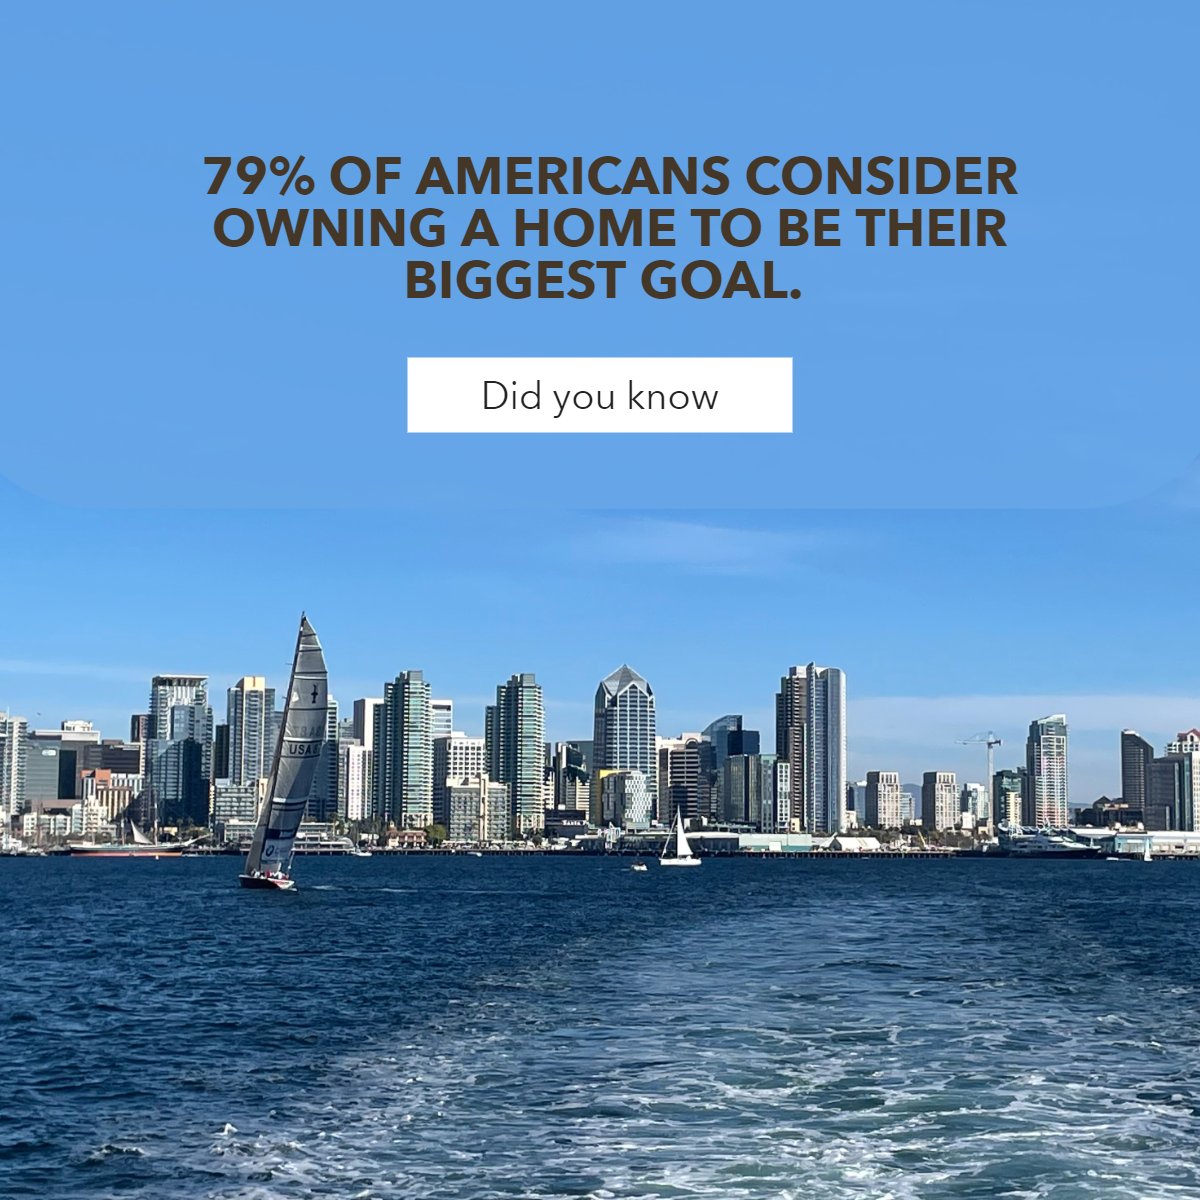 What do you consider your biggest goal? 🤔

Let us know in the comments below!

#owningahome #americans #realestatefact  #didyouknow #didyouknowfacts 

 #BCOMRealty #PaoloBarrasso #FloridaRealtor #FortLauderdale #FortLauderdaleBeach #PrepareMyHomeForSale #RealtorTips